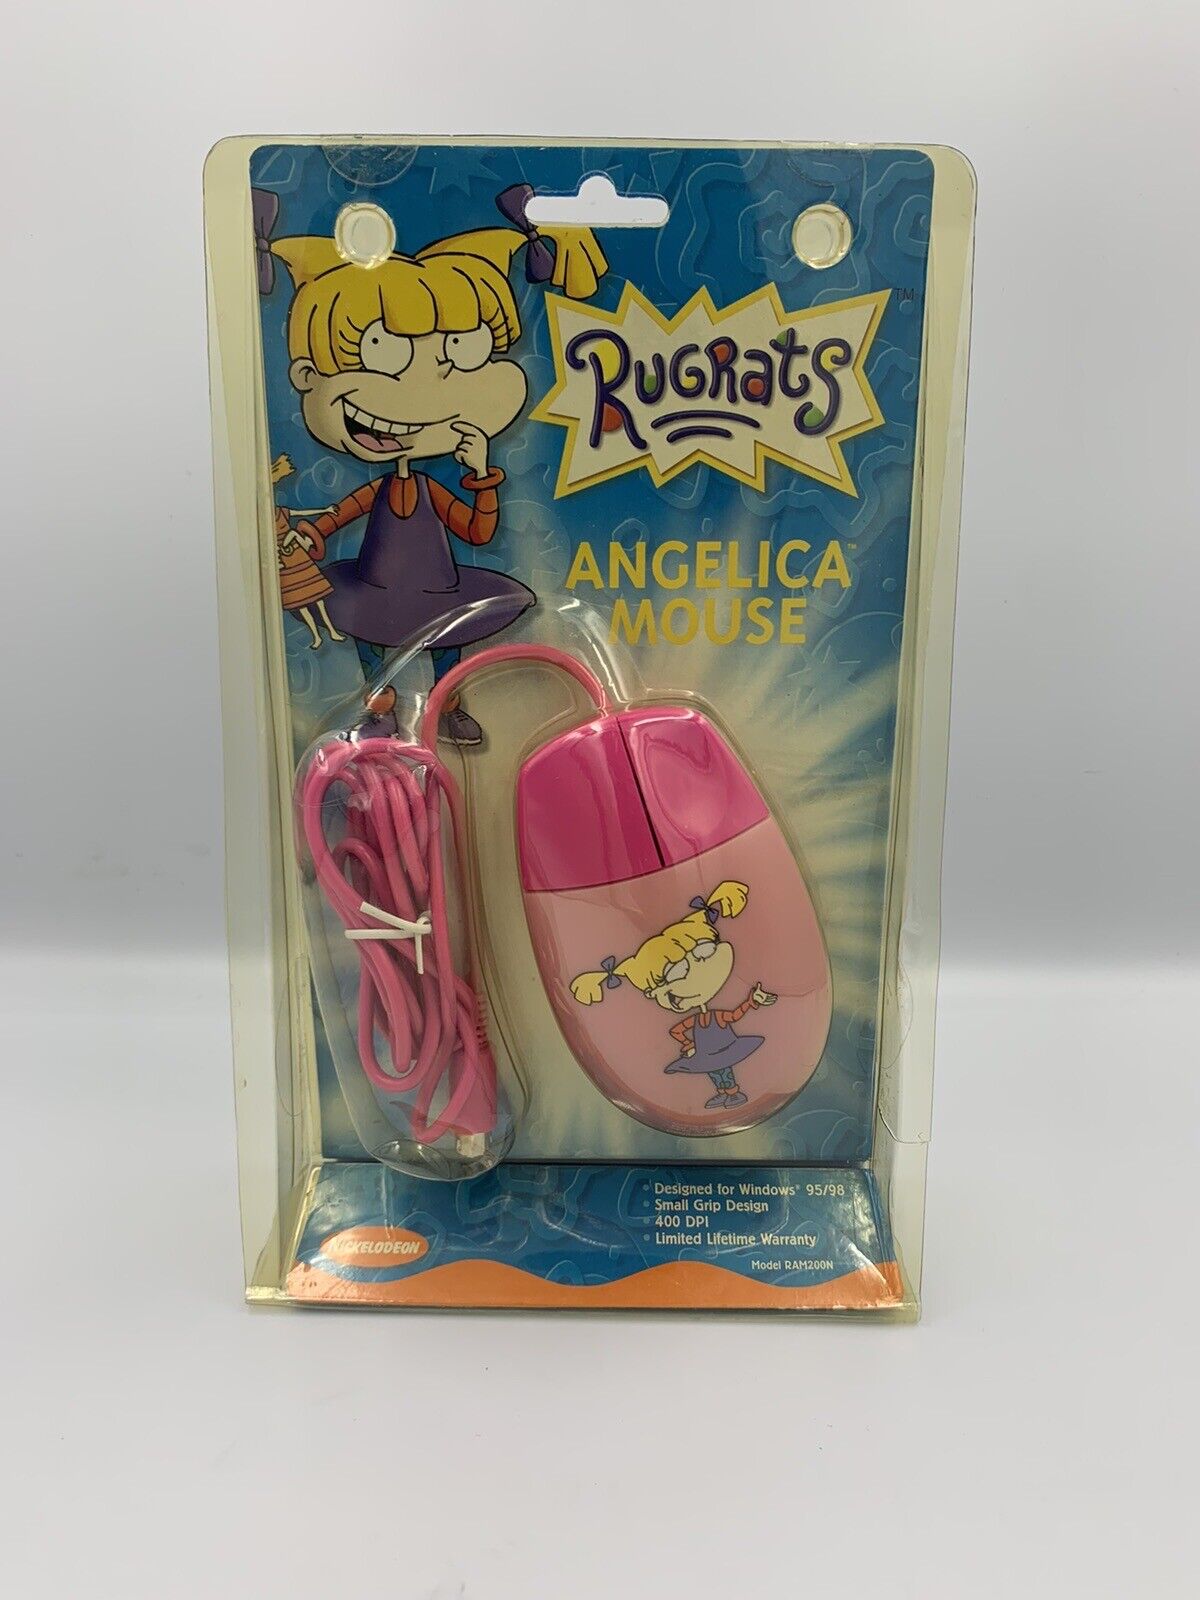 Vintage Nickelodeon Rugrats Angelica PC Mouse